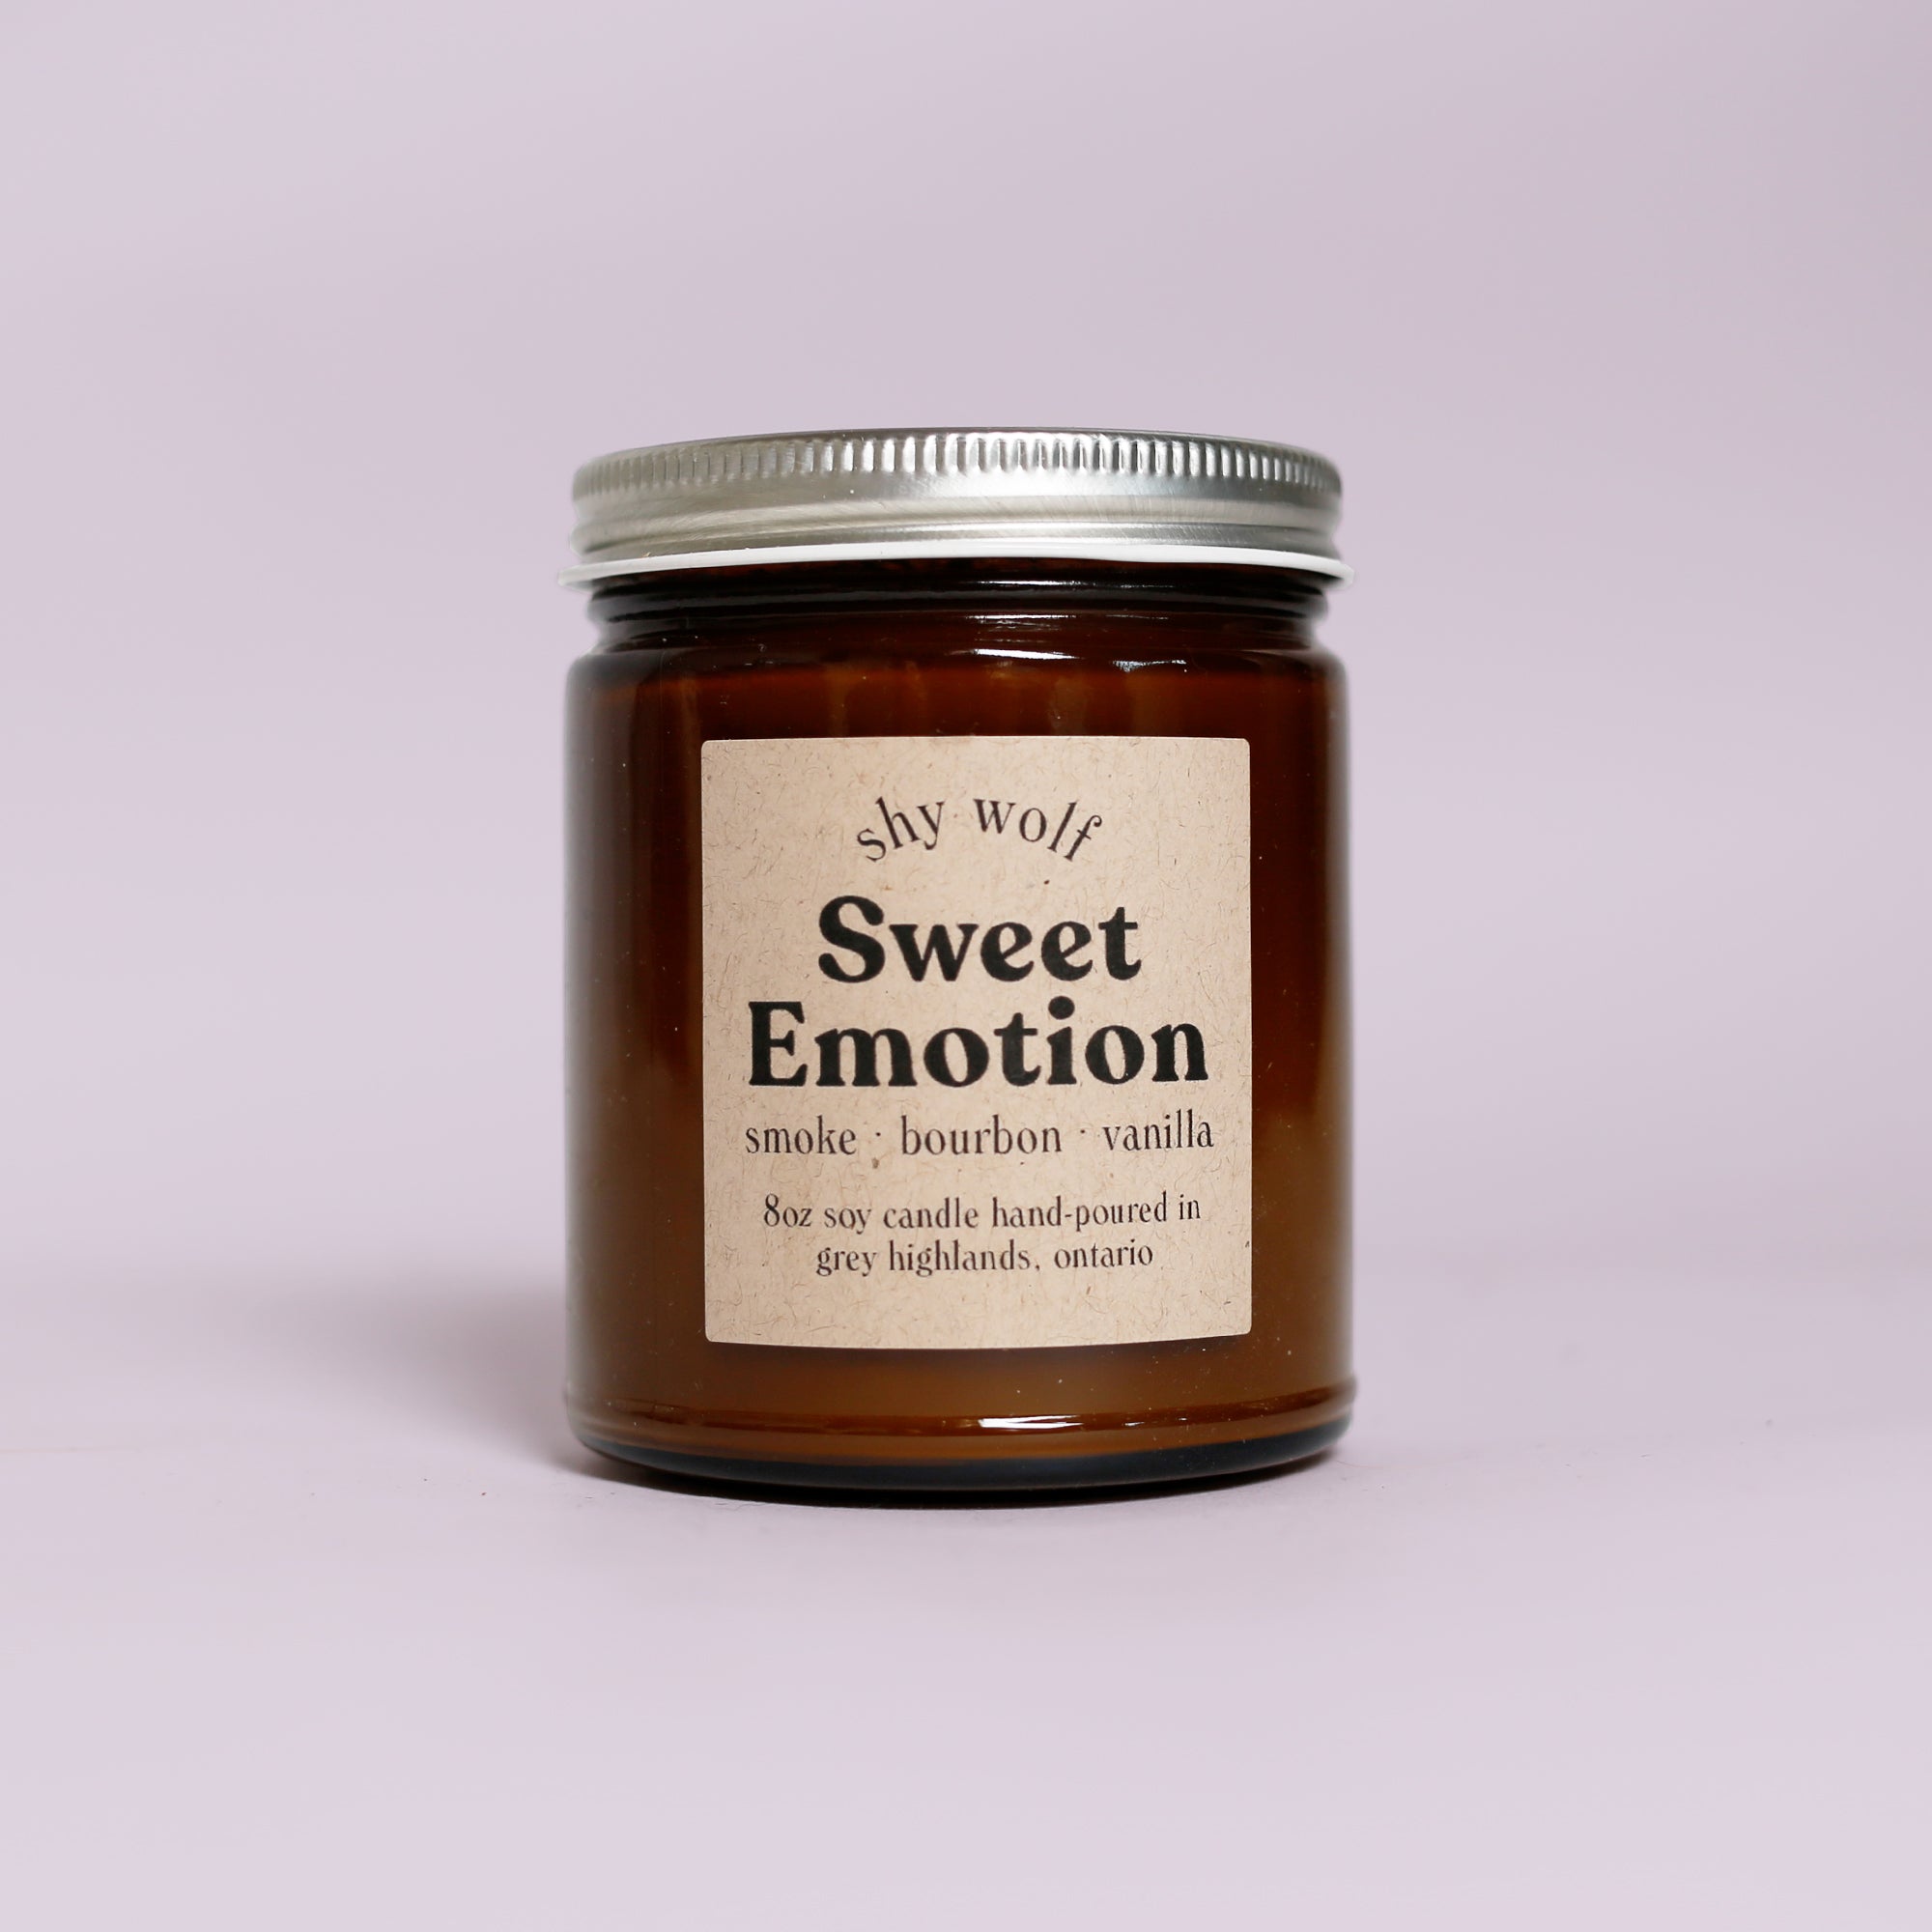 Shy Wolf Candles - Sweet Emotion